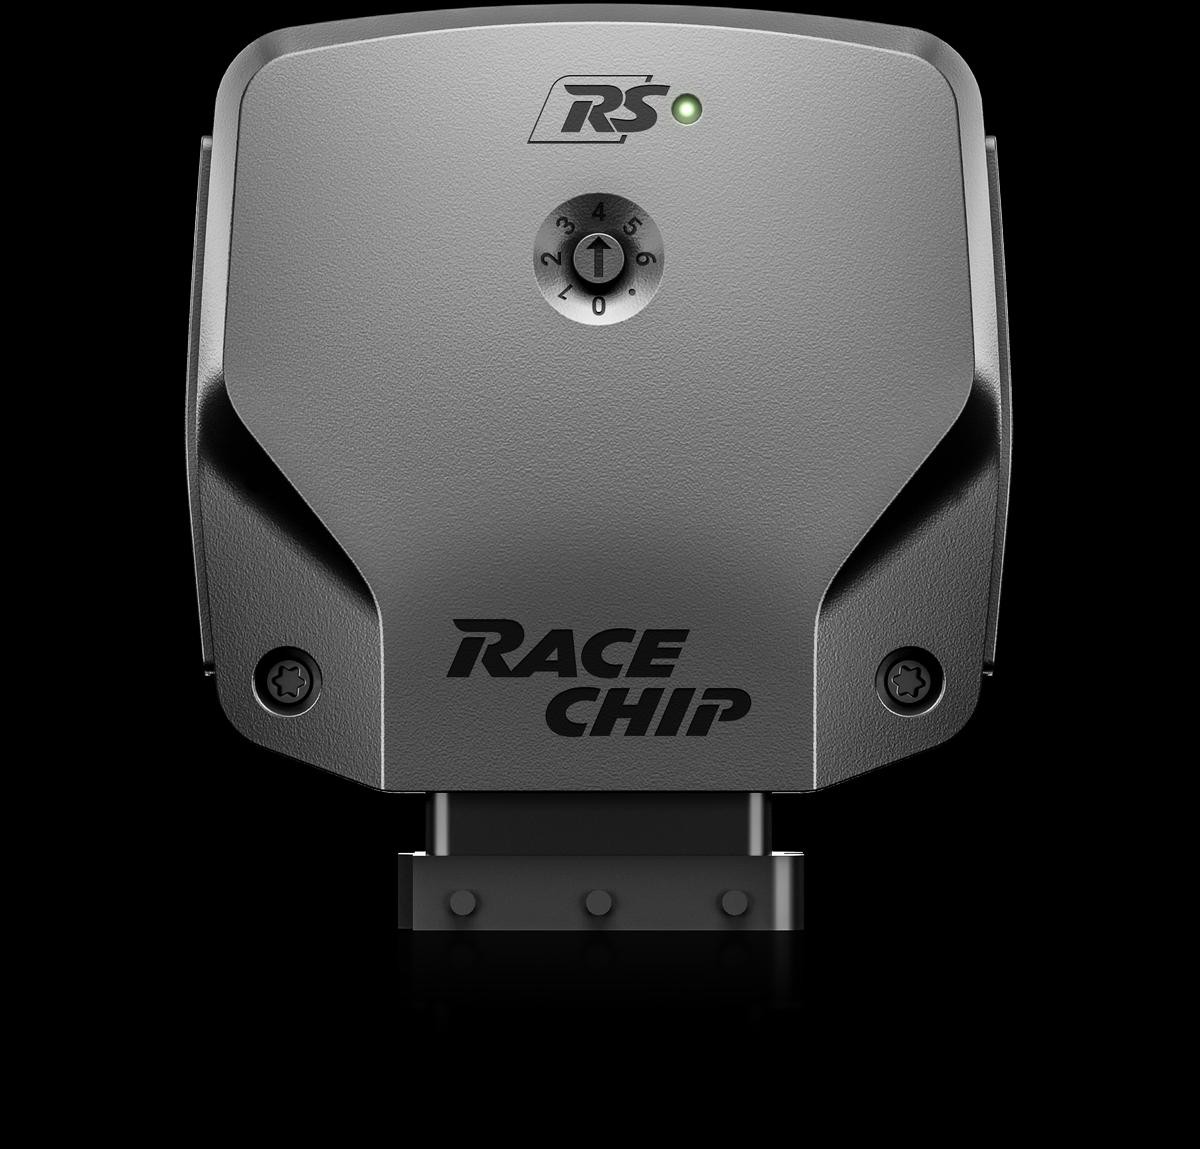 Fiat Chip tuning RaceChip 52285912 at a good price